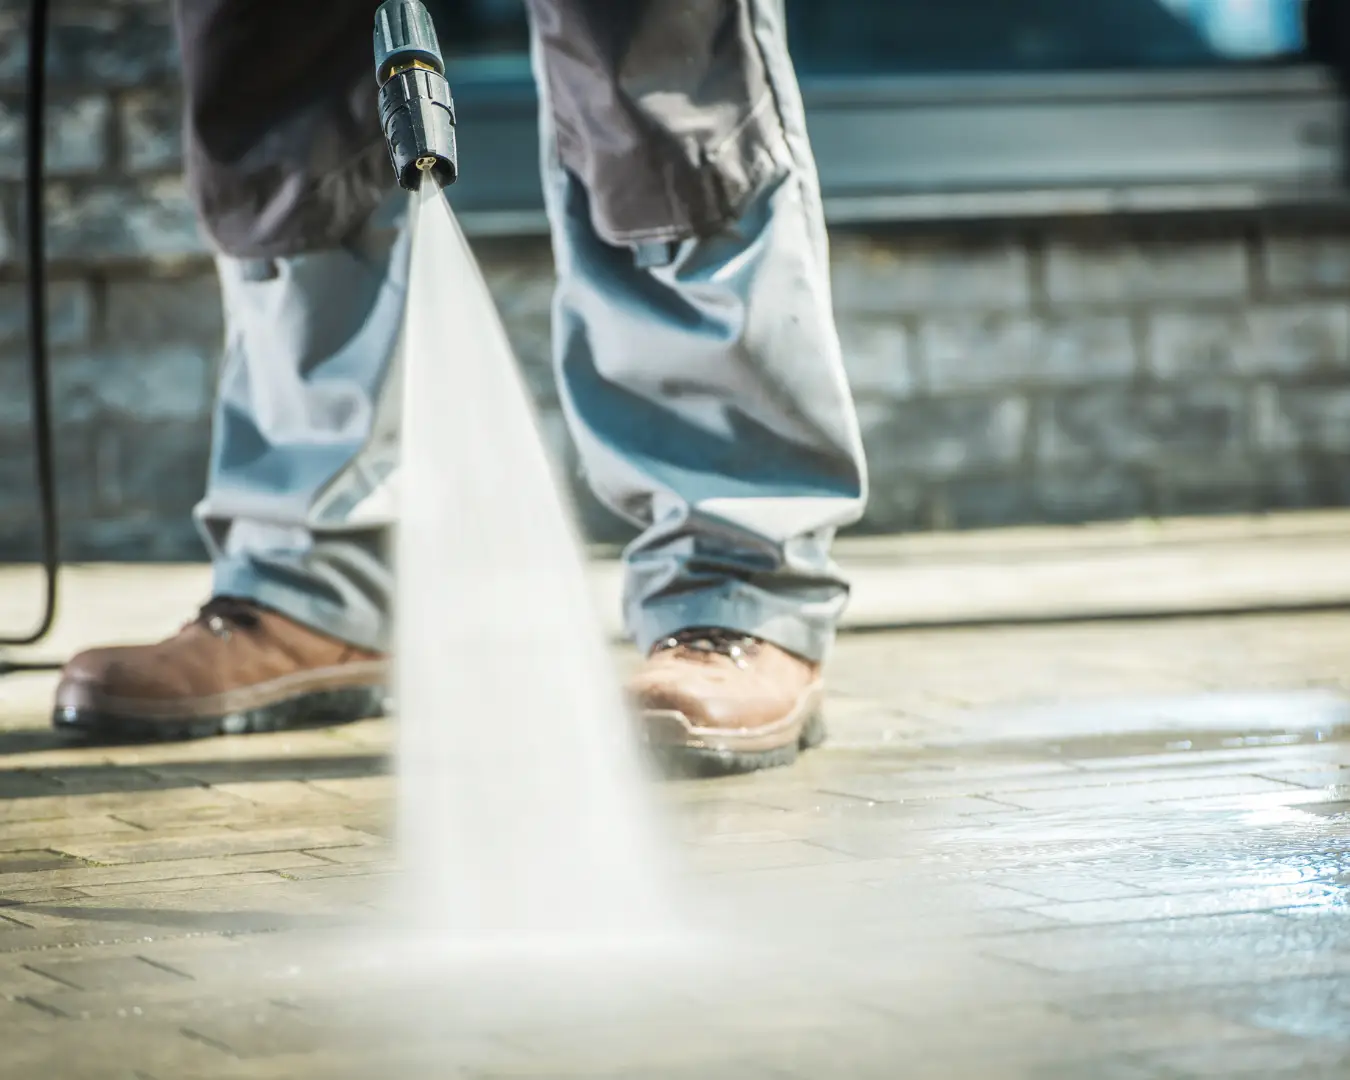 Close up of man wearing boots and jeans pressure washing outdoor walkway.